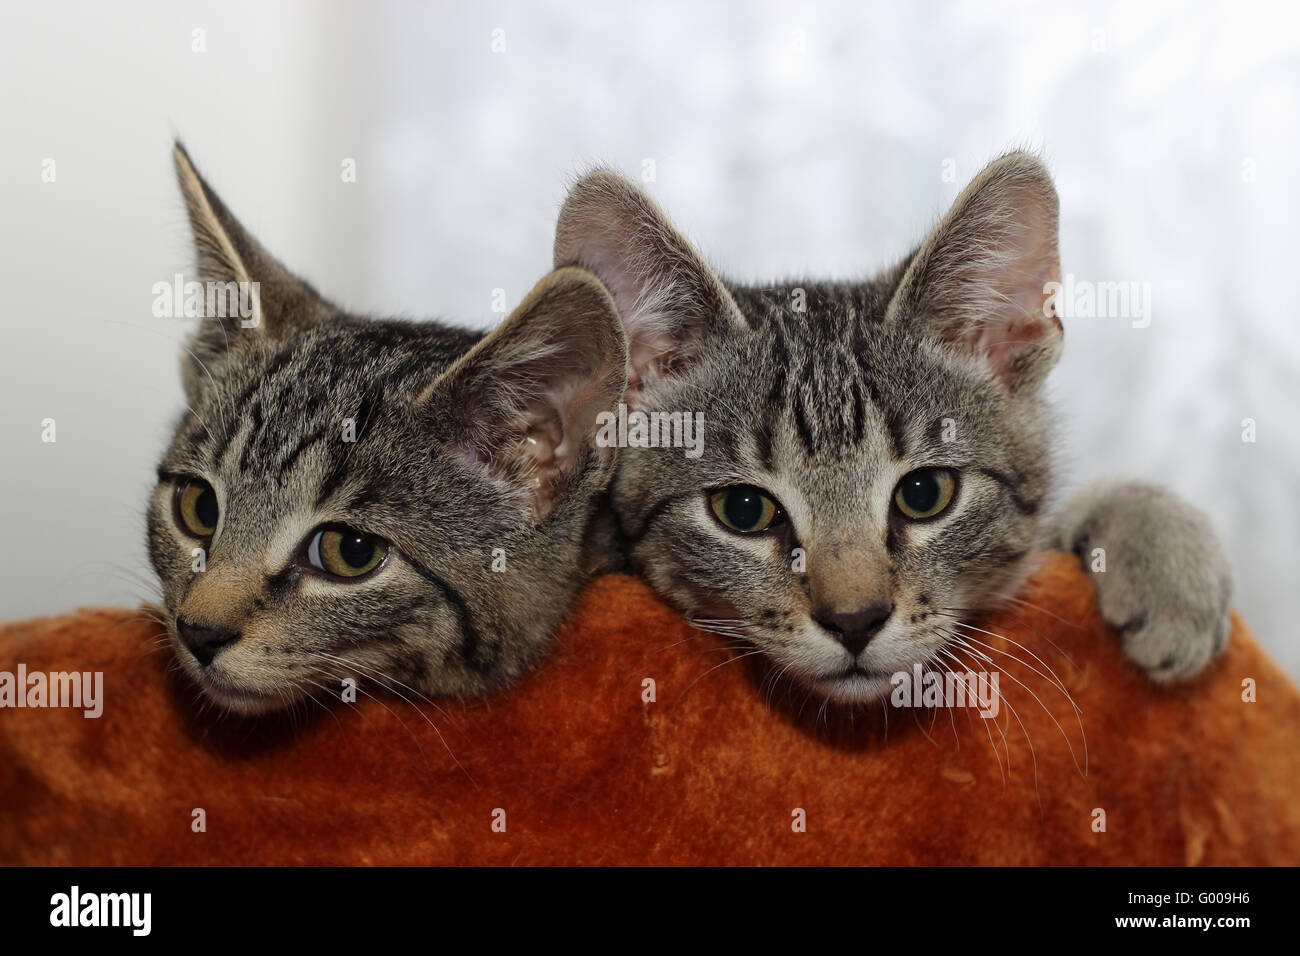 two cats Stock Photo